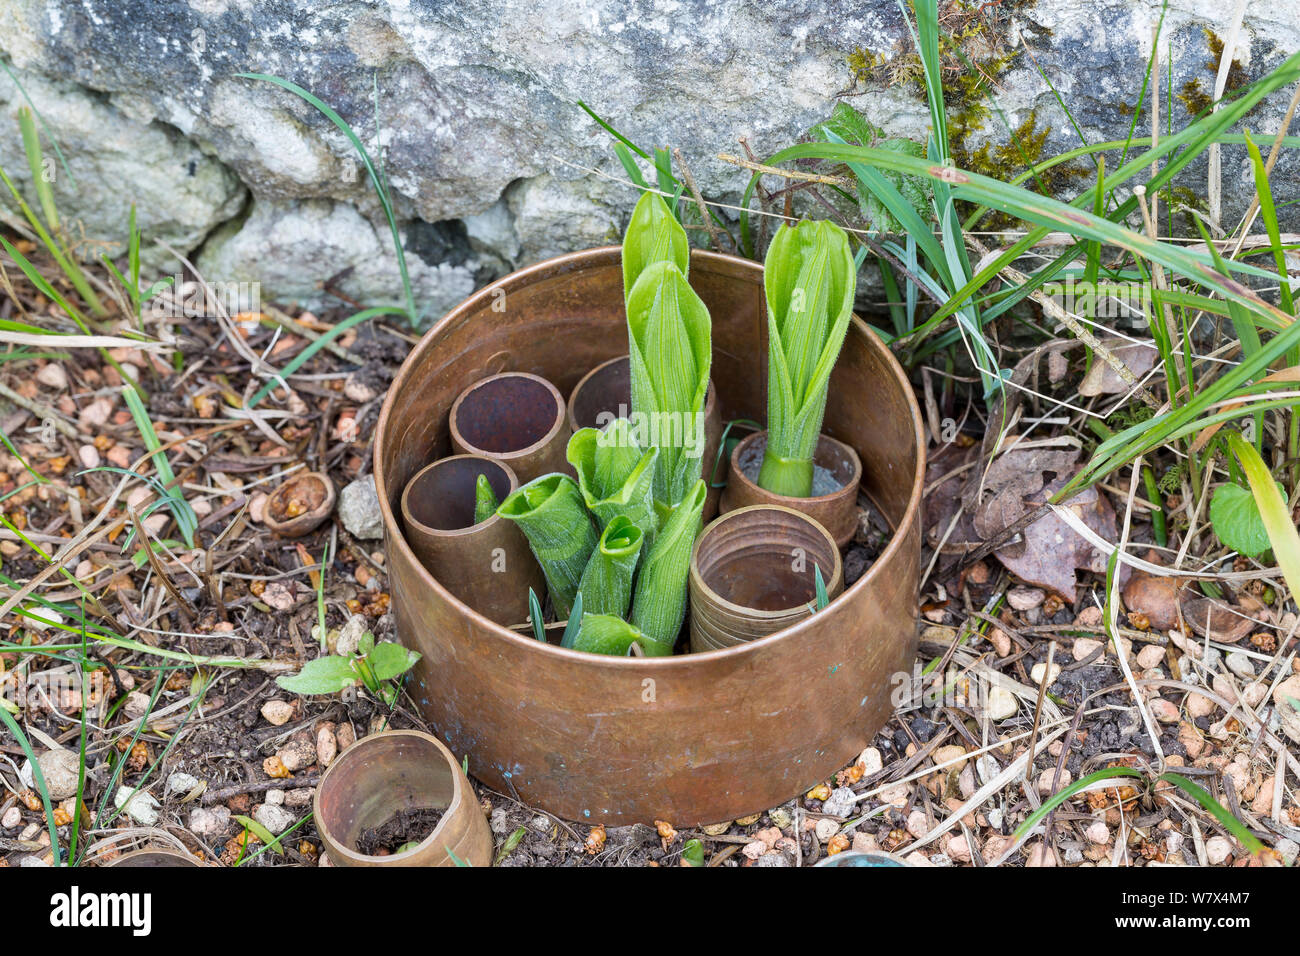 Young Lady&#39;s Slipper orchid plants (Cypripedium calceolus)  protected by plastic rings, Lancashire, UK. April. Stock Photo